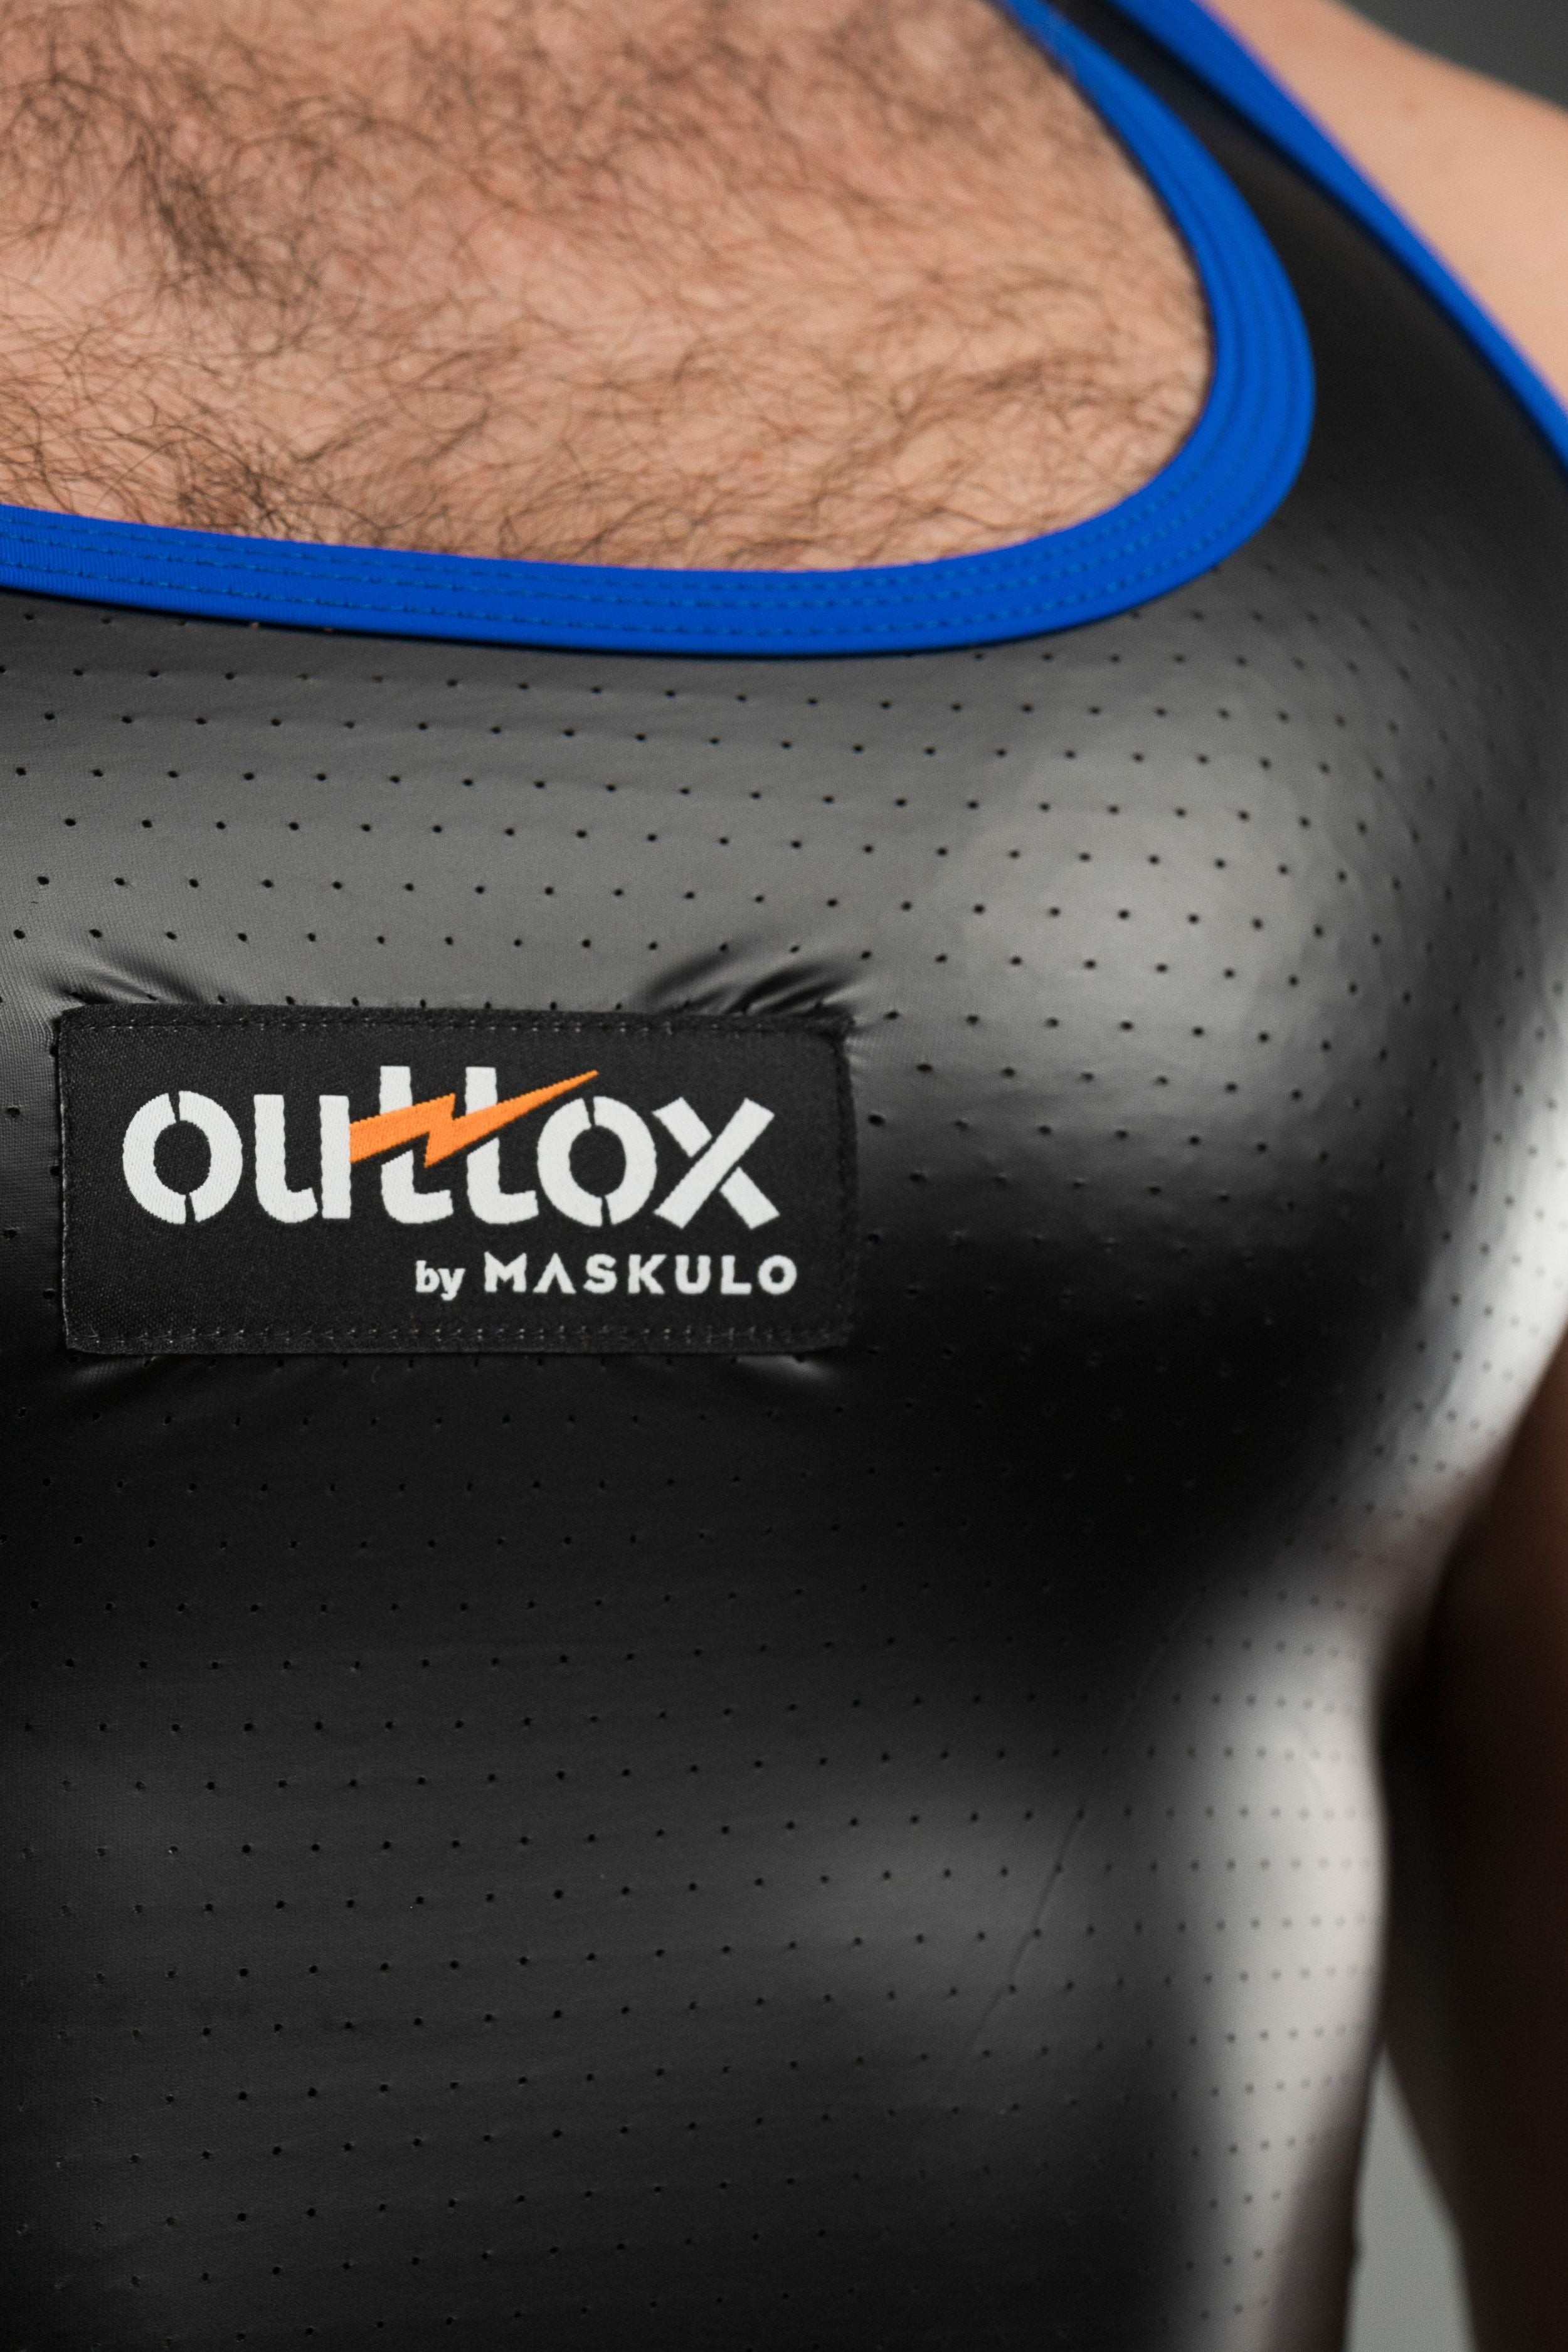 Outtox. Tank top. Black+Blue